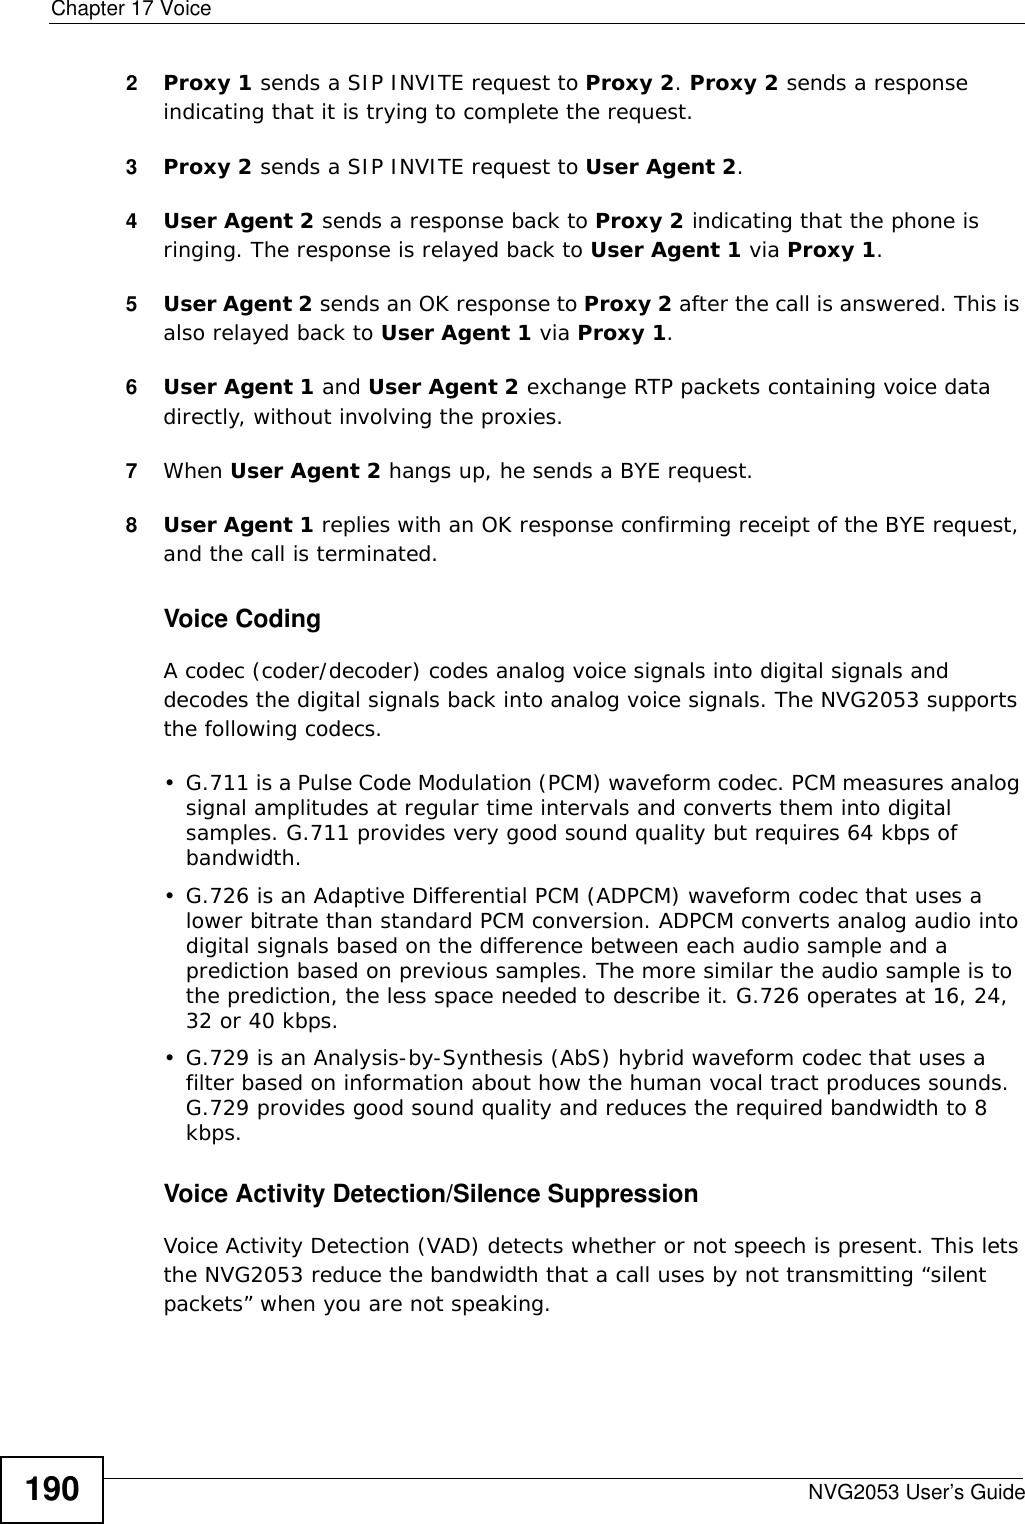 Chapter 17 VoiceNVG2053 User’s Guide1902Proxy 1 sends a SIP INVITE request to Proxy 2. Proxy 2 sends a response indicating that it is trying to complete the request.3Proxy 2 sends a SIP INVITE request to User Agent 2.4User Agent 2 sends a response back to Proxy 2 indicating that the phone is ringing. The response is relayed back to User Agent 1 via Proxy 1.5User Agent 2 sends an OK response to Proxy 2 after the call is answered. This is also relayed back to User Agent 1 via Proxy 1.6User Agent 1 and User Agent 2 exchange RTP packets containing voice data directly, without involving the proxies.7When User Agent 2 hangs up, he sends a BYE request. 8User Agent 1 replies with an OK response confirming receipt of the BYE request, and the call is terminated.Voice CodingA codec (coder/decoder) codes analog voice signals into digital signals and decodes the digital signals back into analog voice signals. The NVG2053 supports the following codecs.• G.711 is a Pulse Code Modulation (PCM) waveform codec. PCM measures analog signal amplitudes at regular time intervals and converts them into digital samples. G.711 provides very good sound quality but requires 64 kbps of bandwidth.• G.726 is an Adaptive Differential PCM (ADPCM) waveform codec that uses a lower bitrate than standard PCM conversion. ADPCM converts analog audio into digital signals based on the difference between each audio sample and a prediction based on previous samples. The more similar the audio sample is to the prediction, the less space needed to describe it. G.726 operates at 16, 24, 32 or 40 kbps. • G.729 is an Analysis-by-Synthesis (AbS) hybrid waveform codec that uses a filter based on information about how the human vocal tract produces sounds. G.729 provides good sound quality and reduces the required bandwidth to 8 kbps.Voice Activity Detection/Silence SuppressionVoice Activity Detection (VAD) detects whether or not speech is present. This lets the NVG2053 reduce the bandwidth that a call uses by not transmitting “silent packets” when you are not speaking.